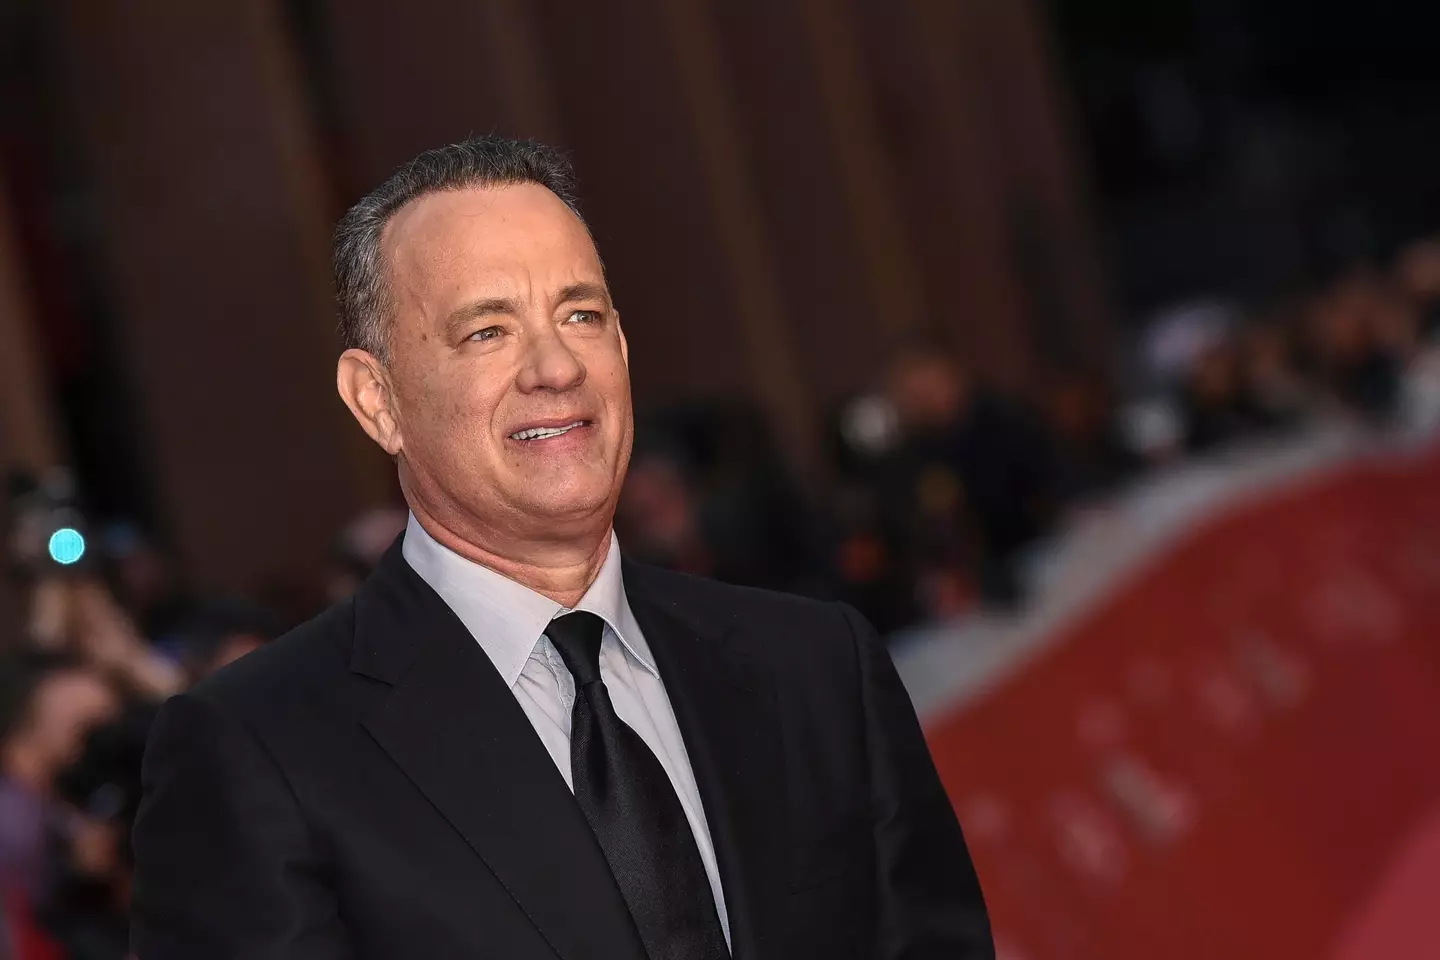 Tom Hanks has been criticised as 'annoying' by some Graham Norton Show viewers.